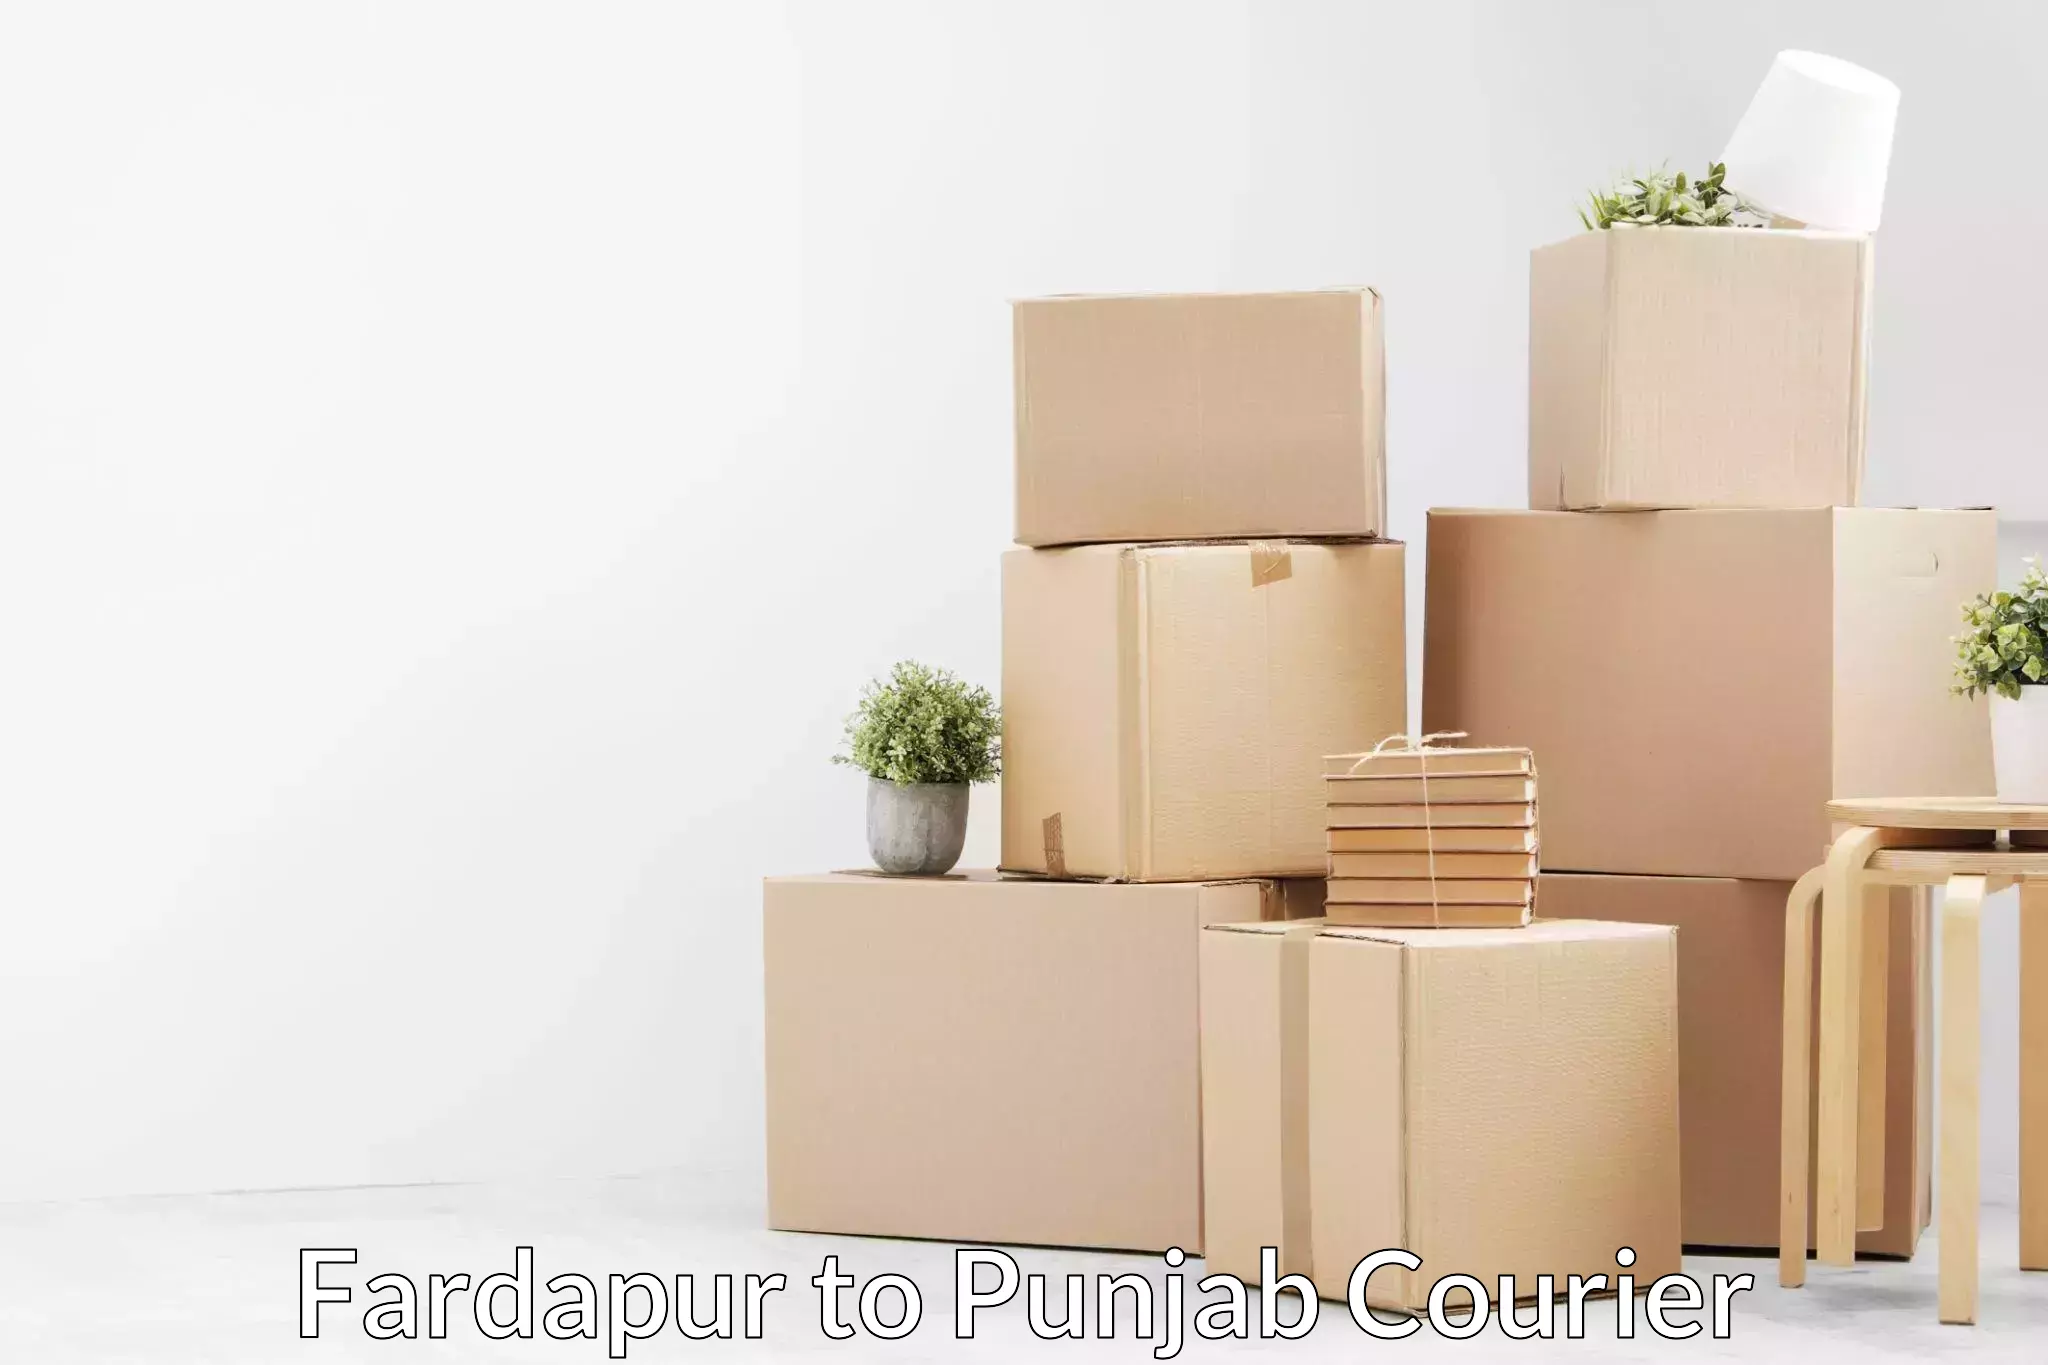 Quality relocation assistance Fardapur to IIT Ropar